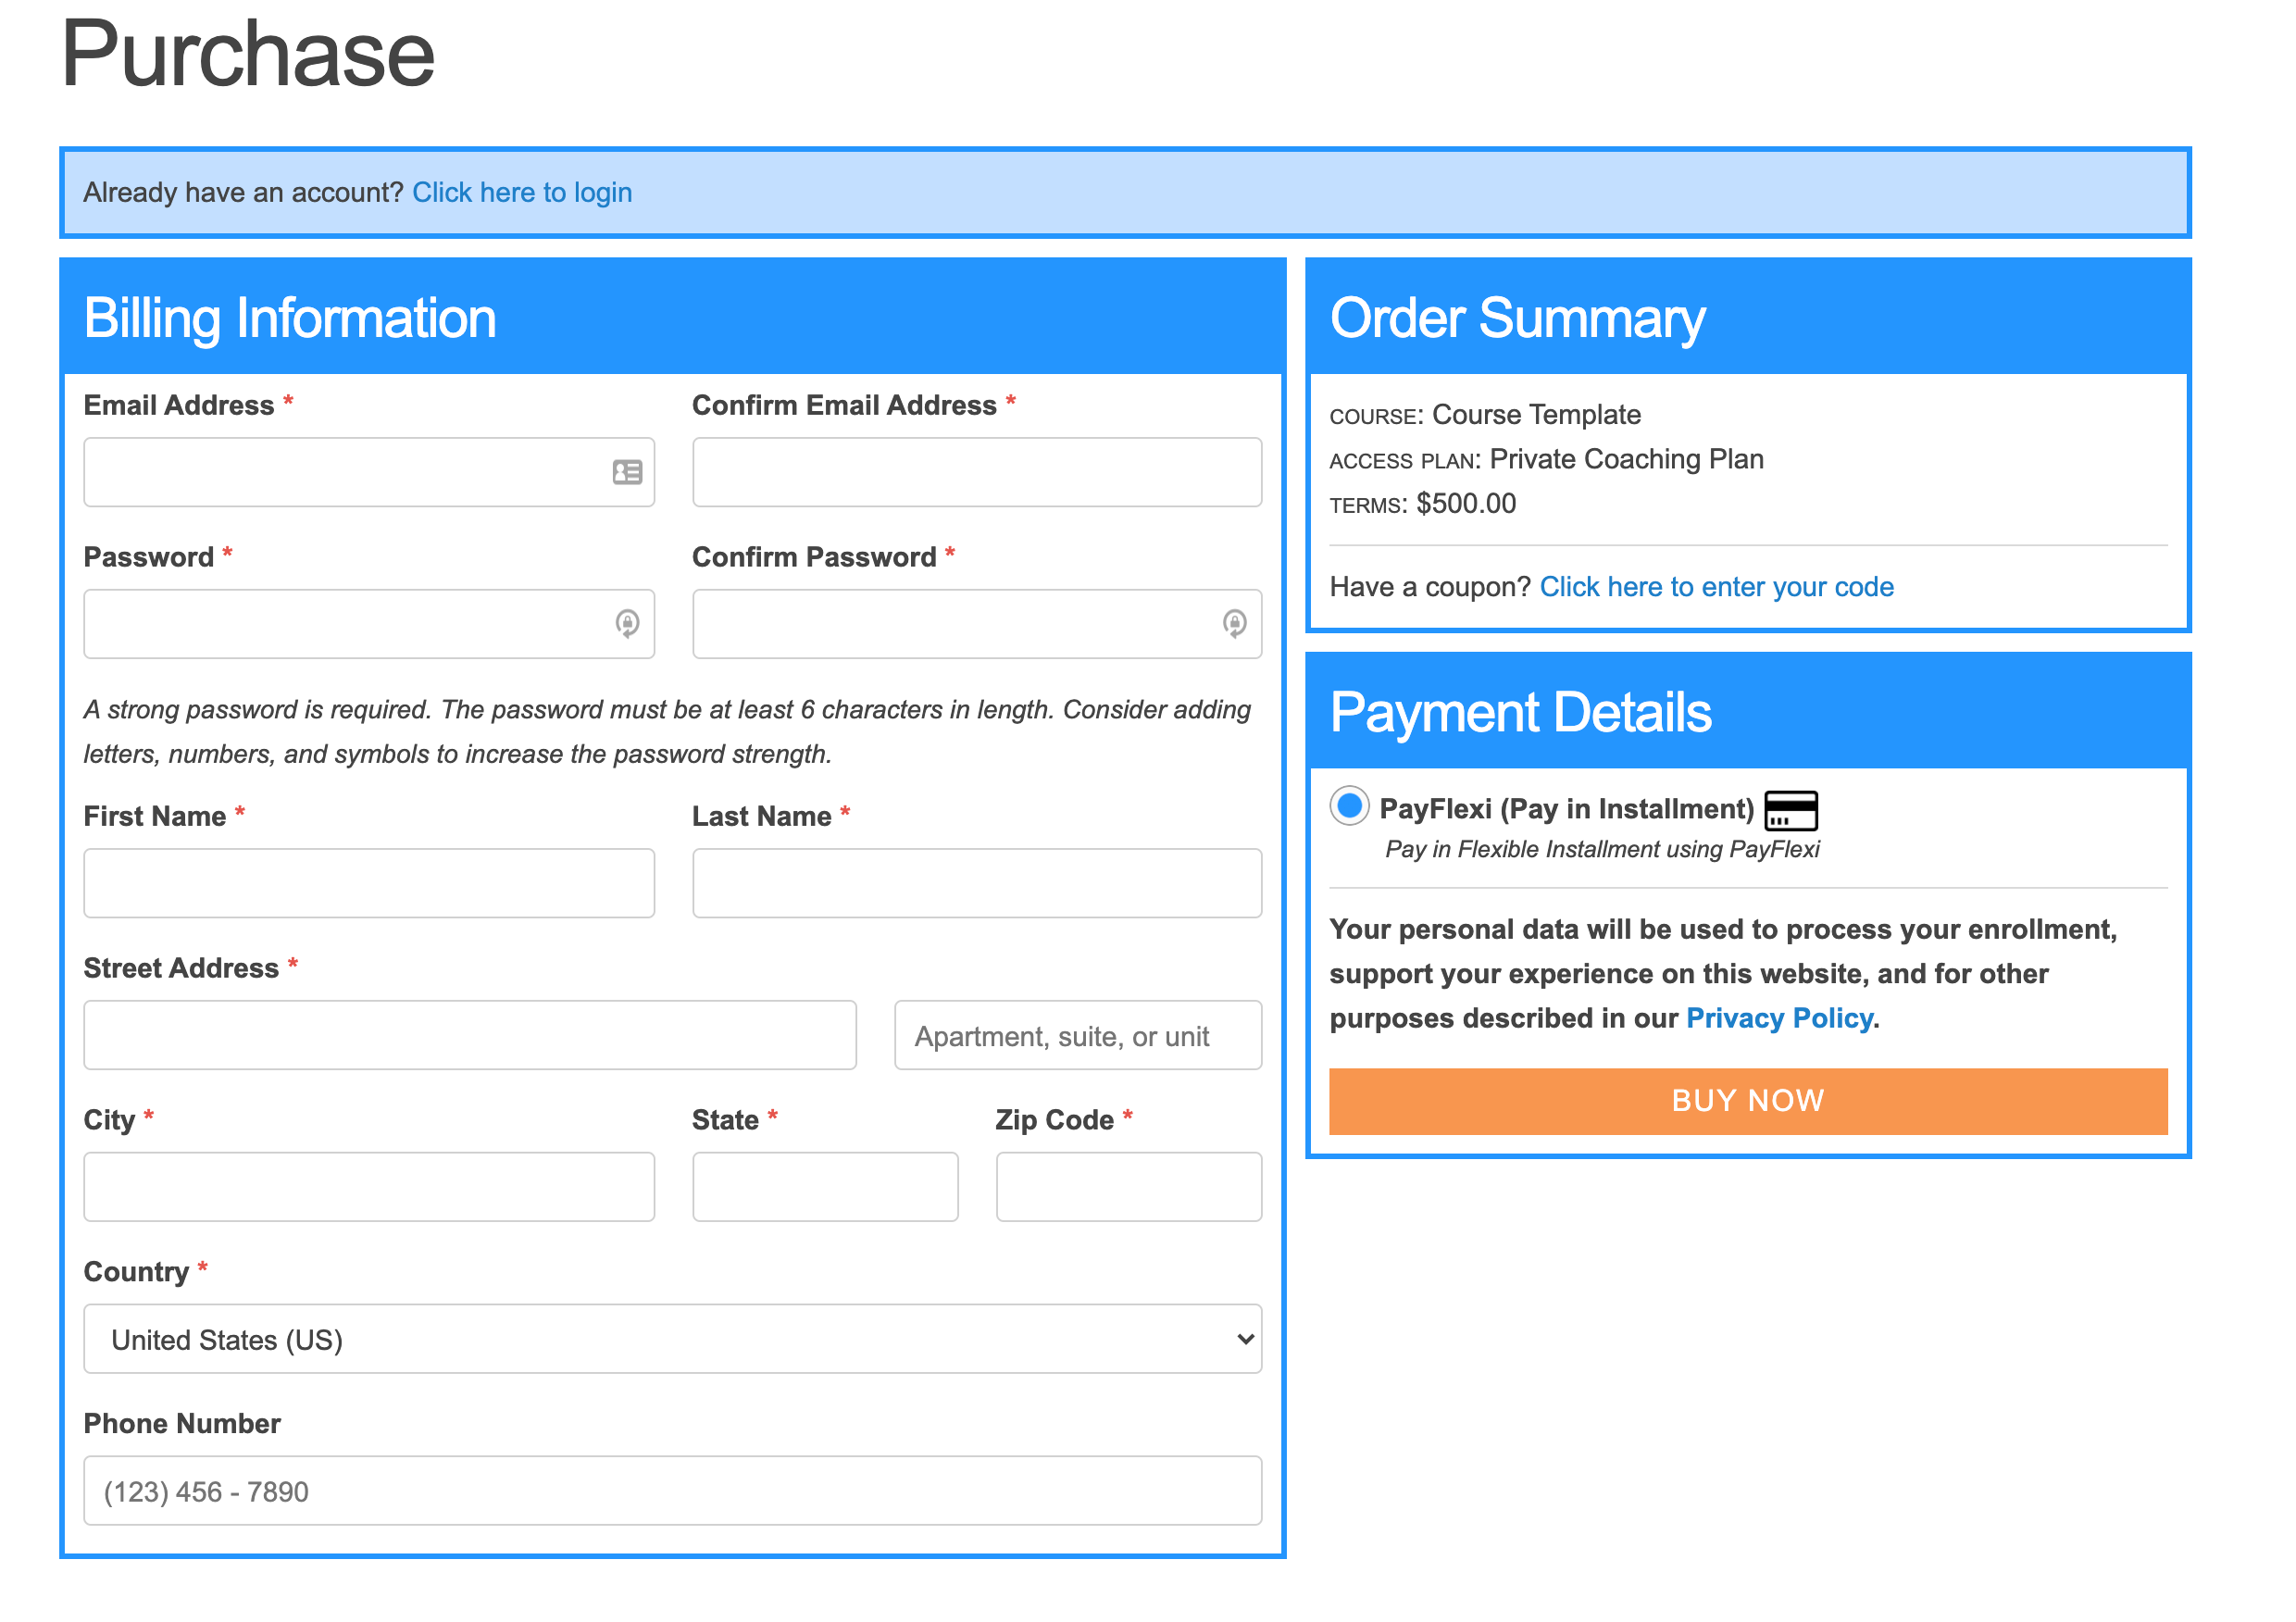 PayFlexi LifterLMS Payment Gateway on the checkout page